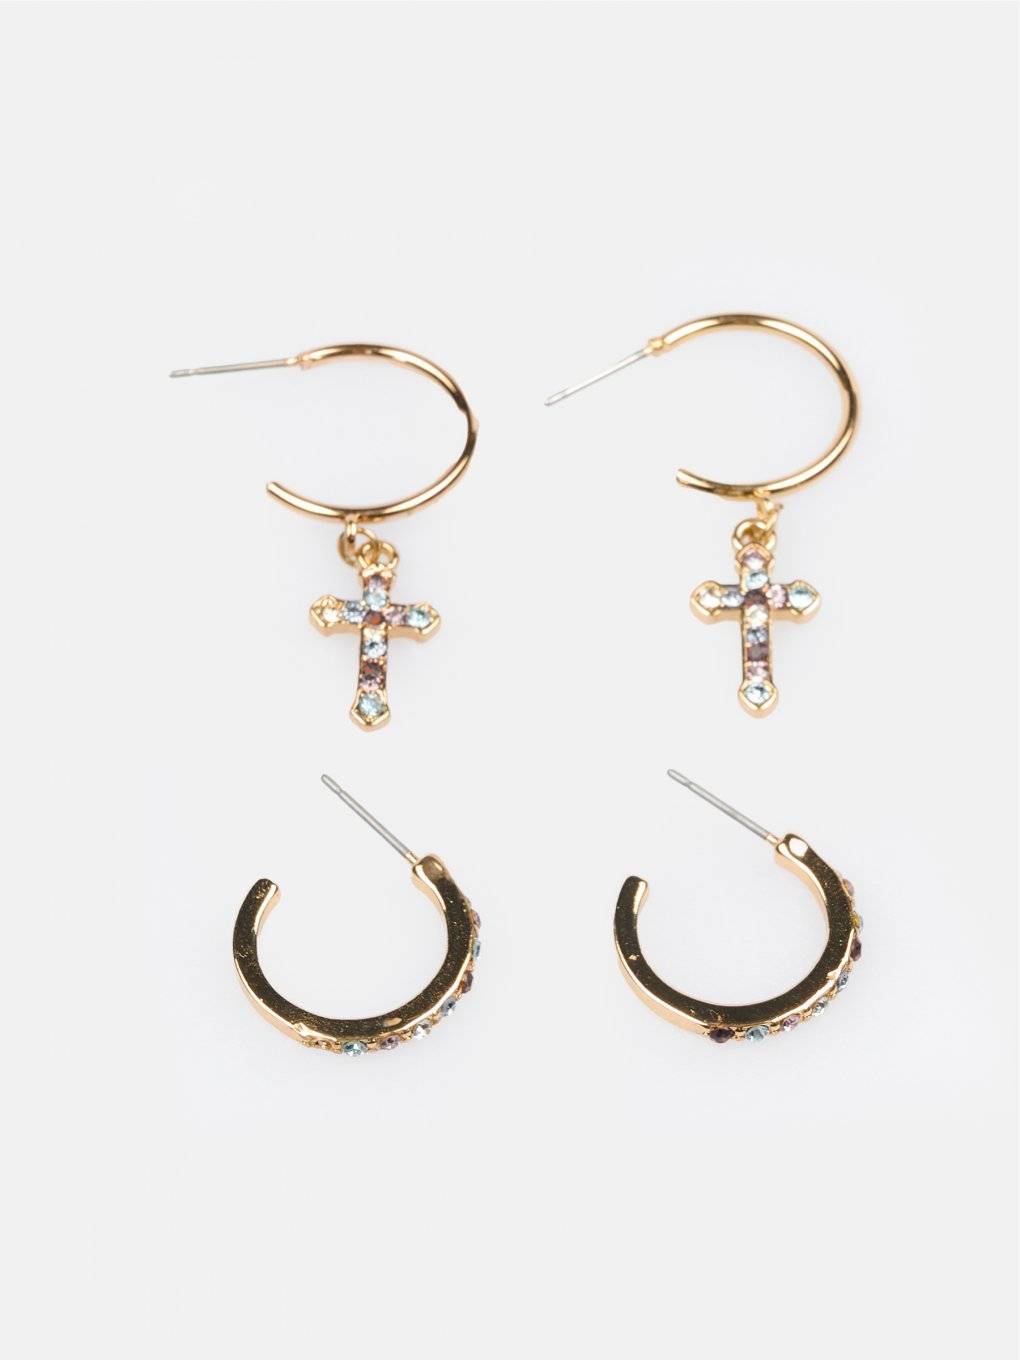 Set of earrings with faux stones